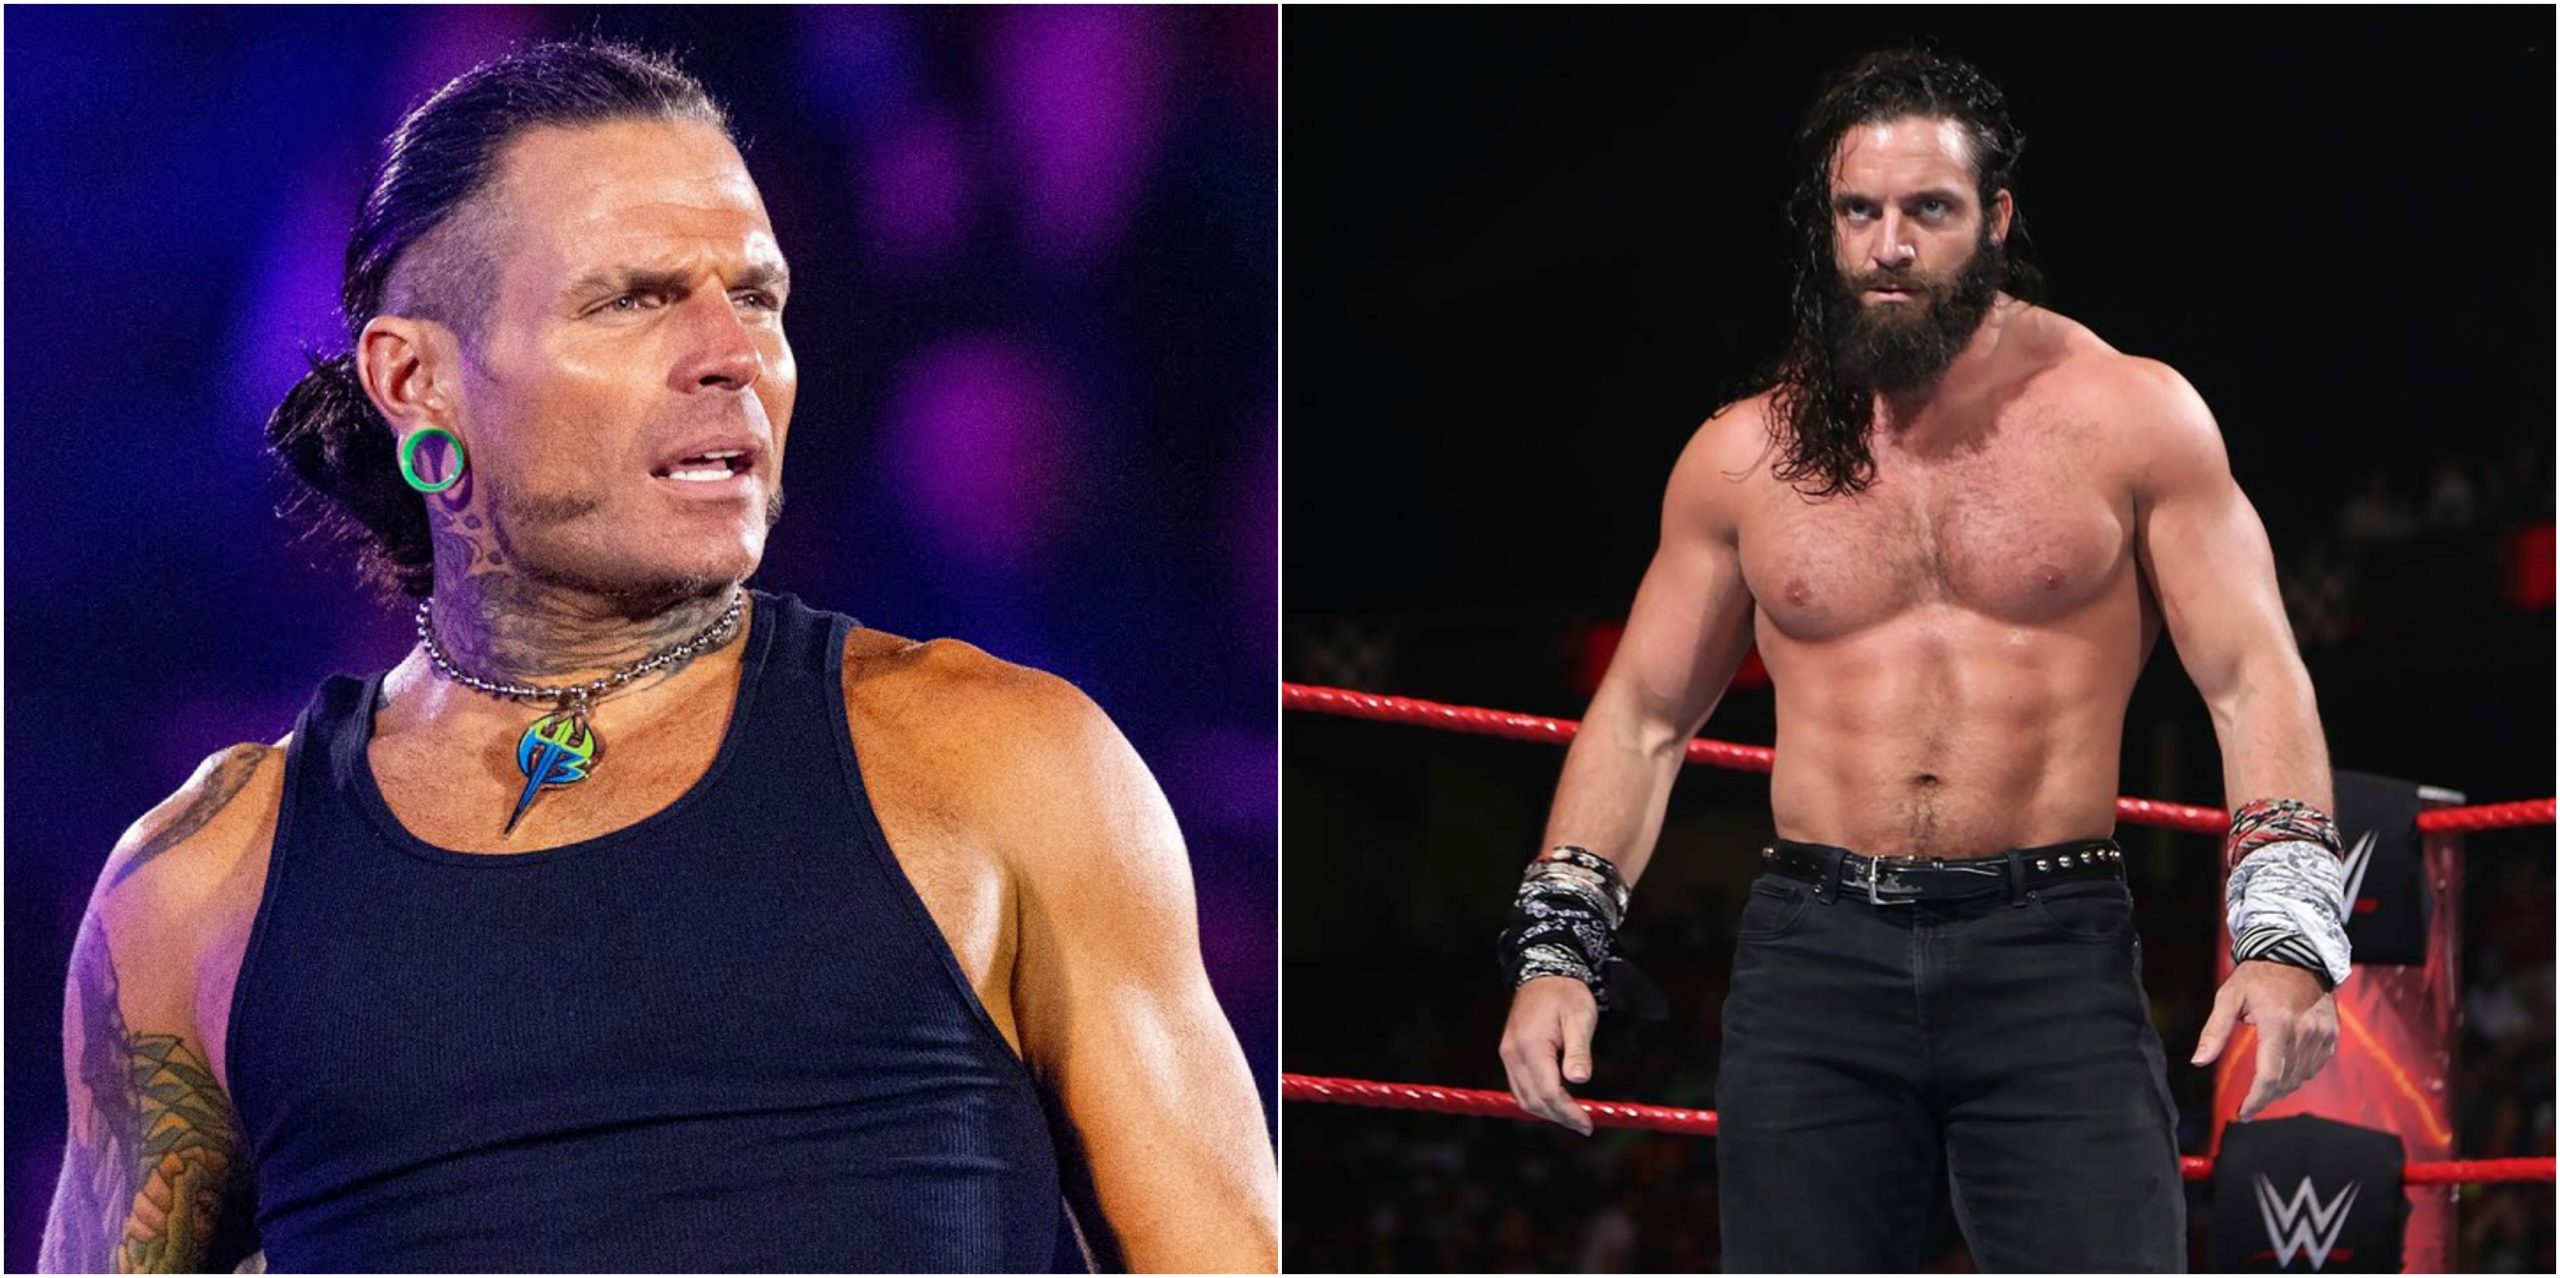 Jeff Hardy vs. Elias confirmed for WWE Hell in a Cell PPV - THE SPORTS ROOM